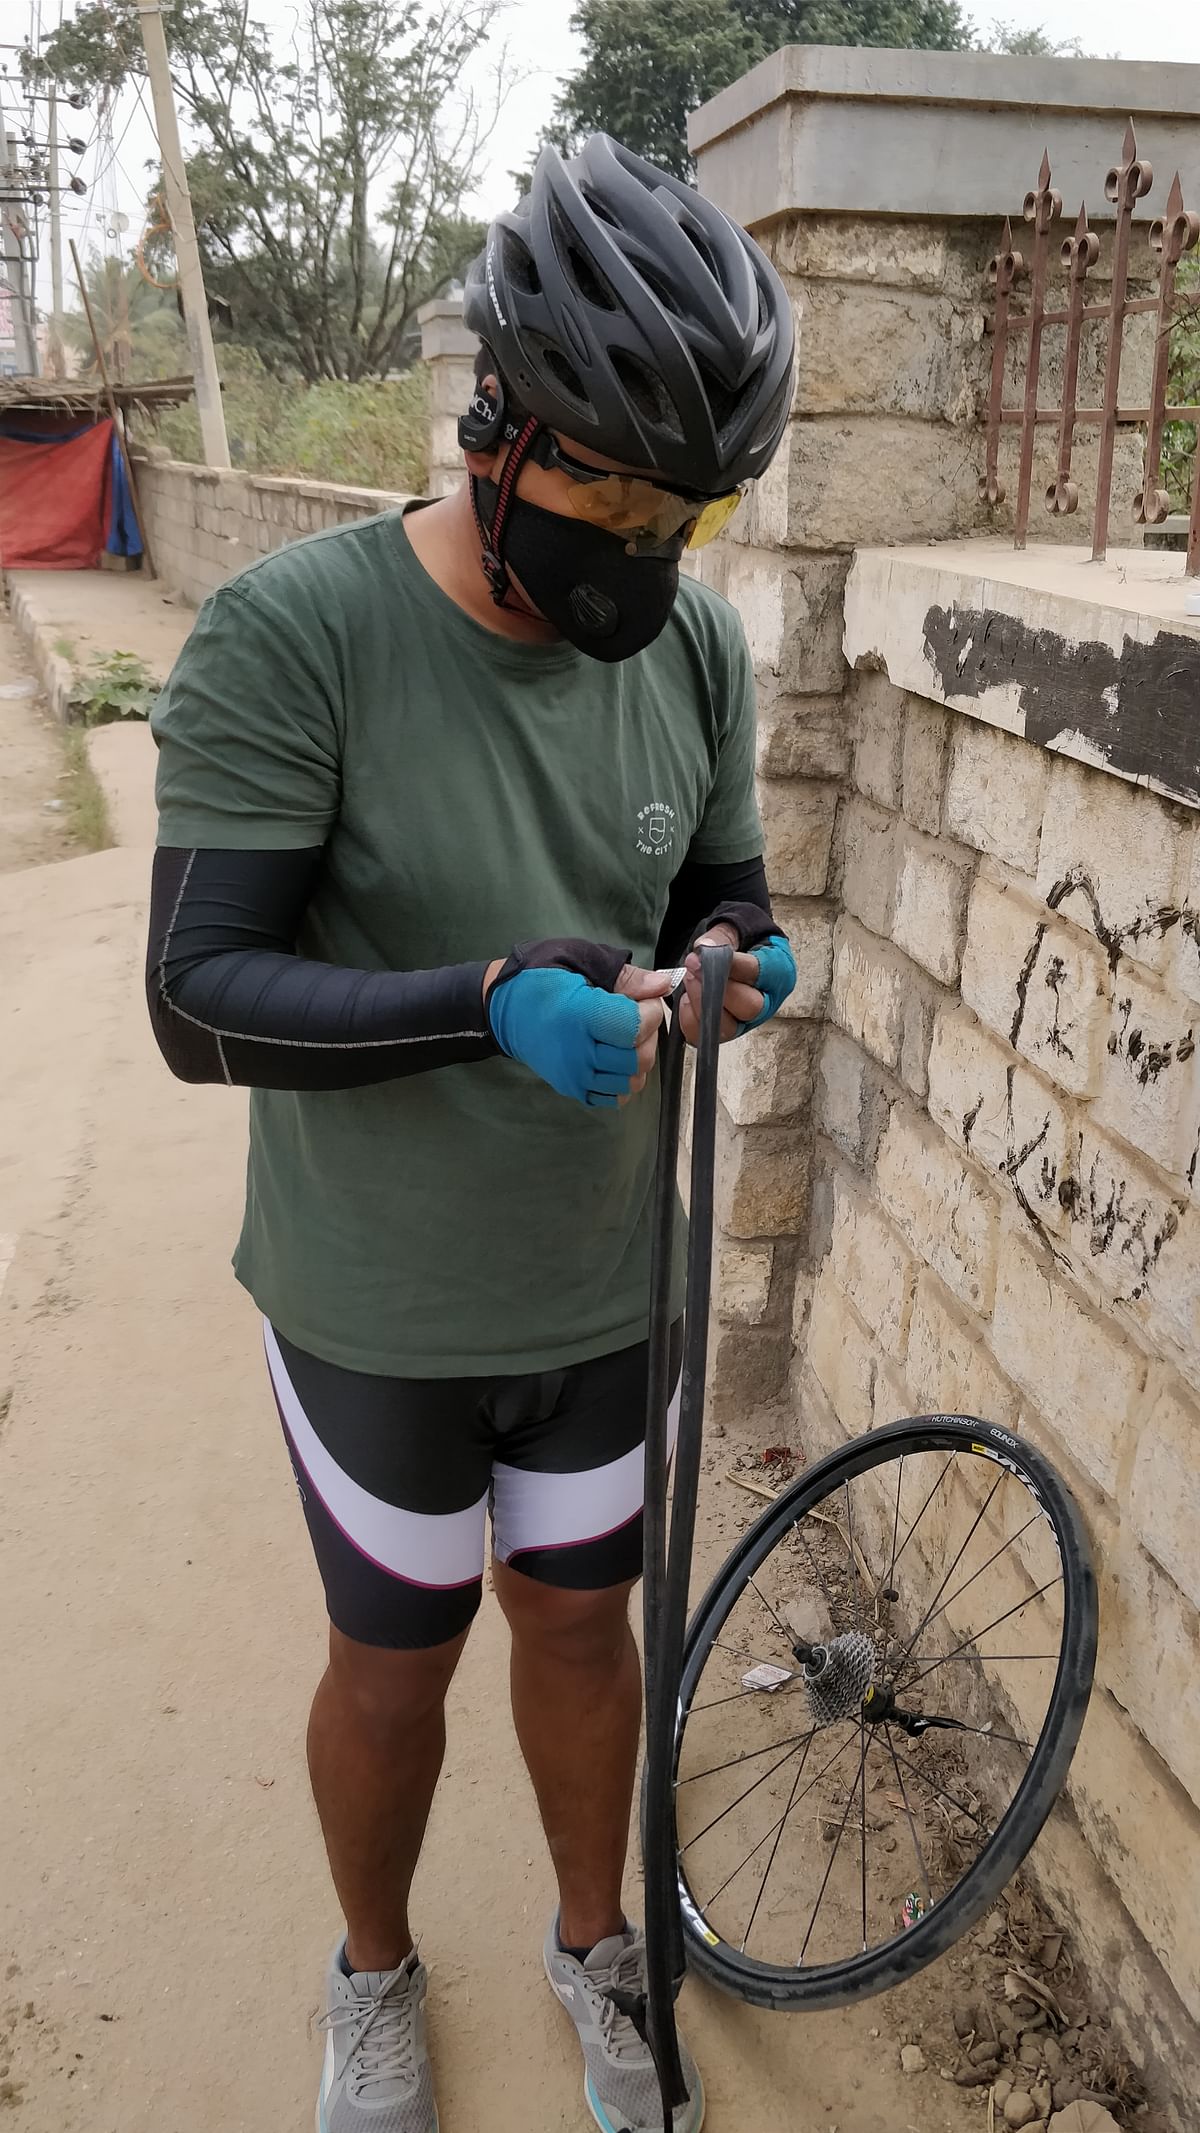 “I cycle 36 kms a day, to and from work. In Bangalore traffic, it takes 45 minutes (it takes over an hour by car).”